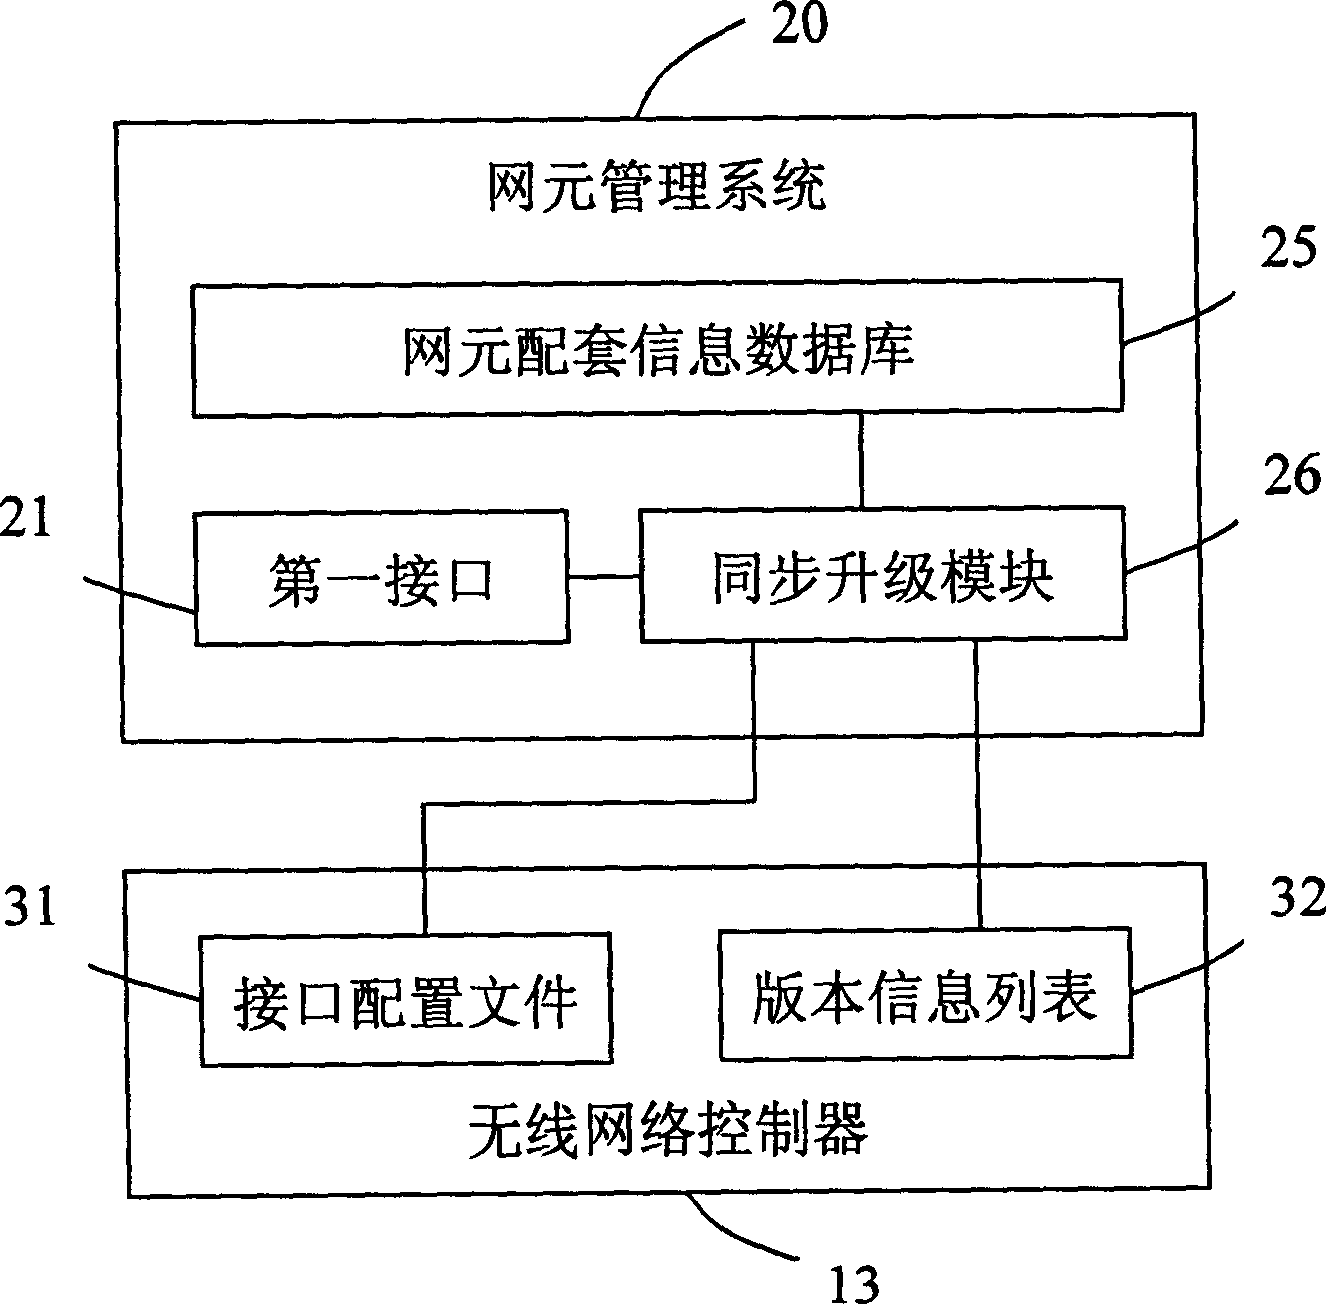 Method and system of interface synchronization in general-purpose mobile communication system